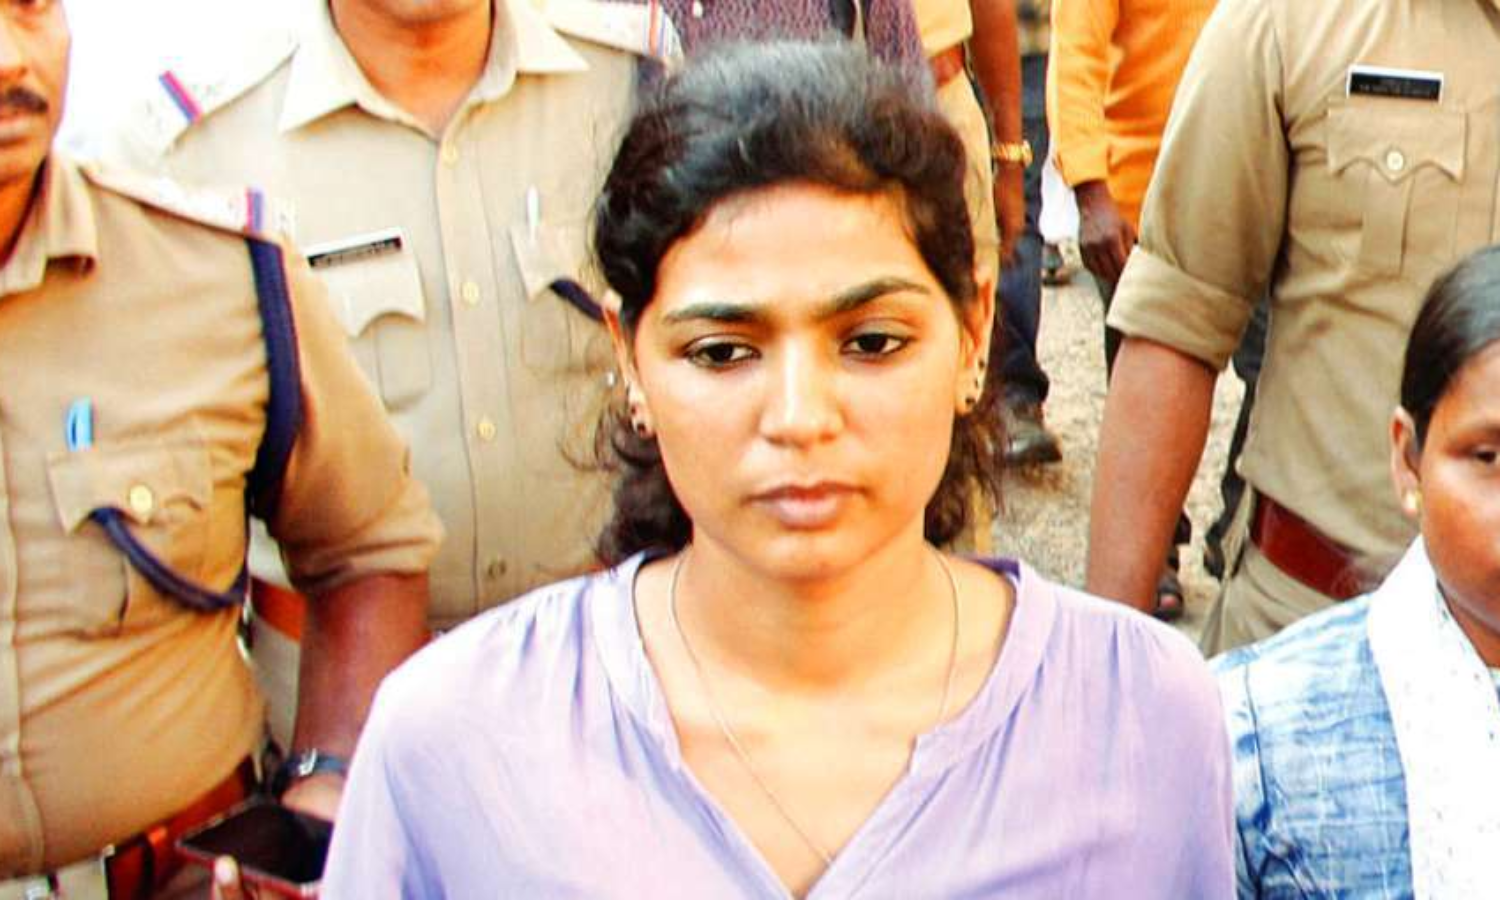 Nudity Per Se Not Obscenity': Rehana Fathima, Booked For Video Showing Her  Children Painting On Her Semi-Nude Body, Moves SC For Bail